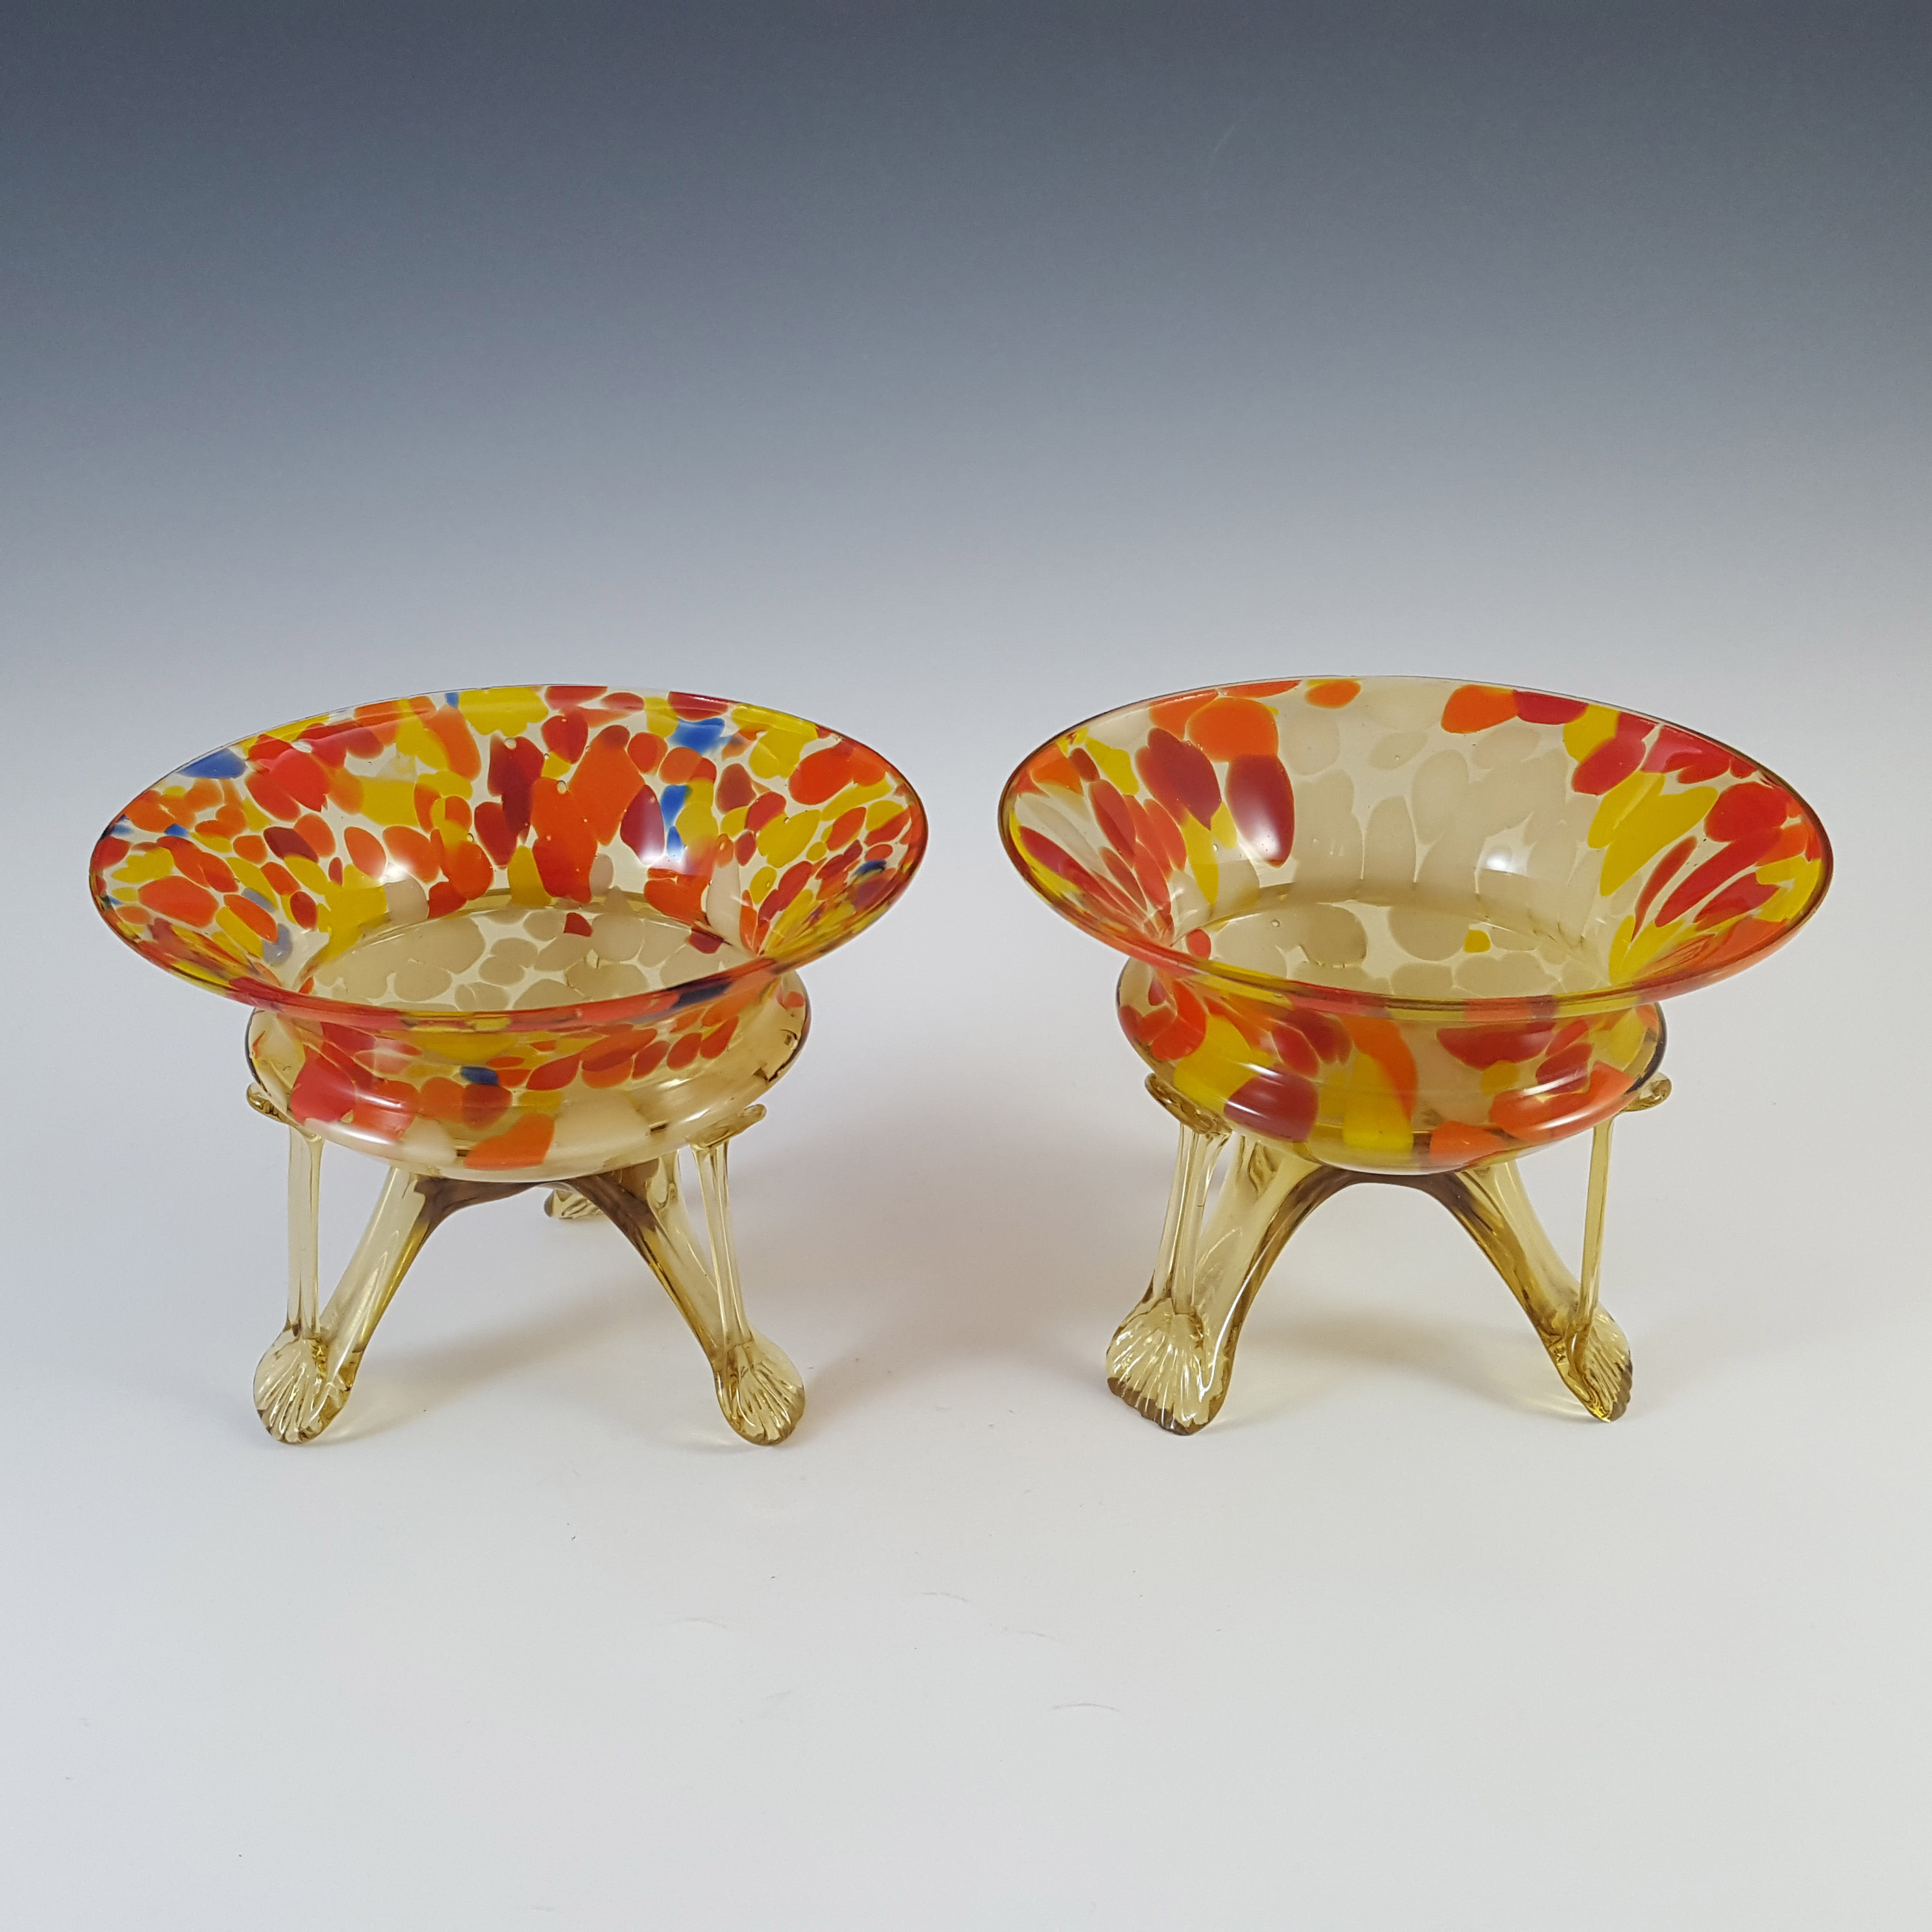 Welz Czech 1940's Pair of Spatter Glass Vases / Bowls - Click Image to Close